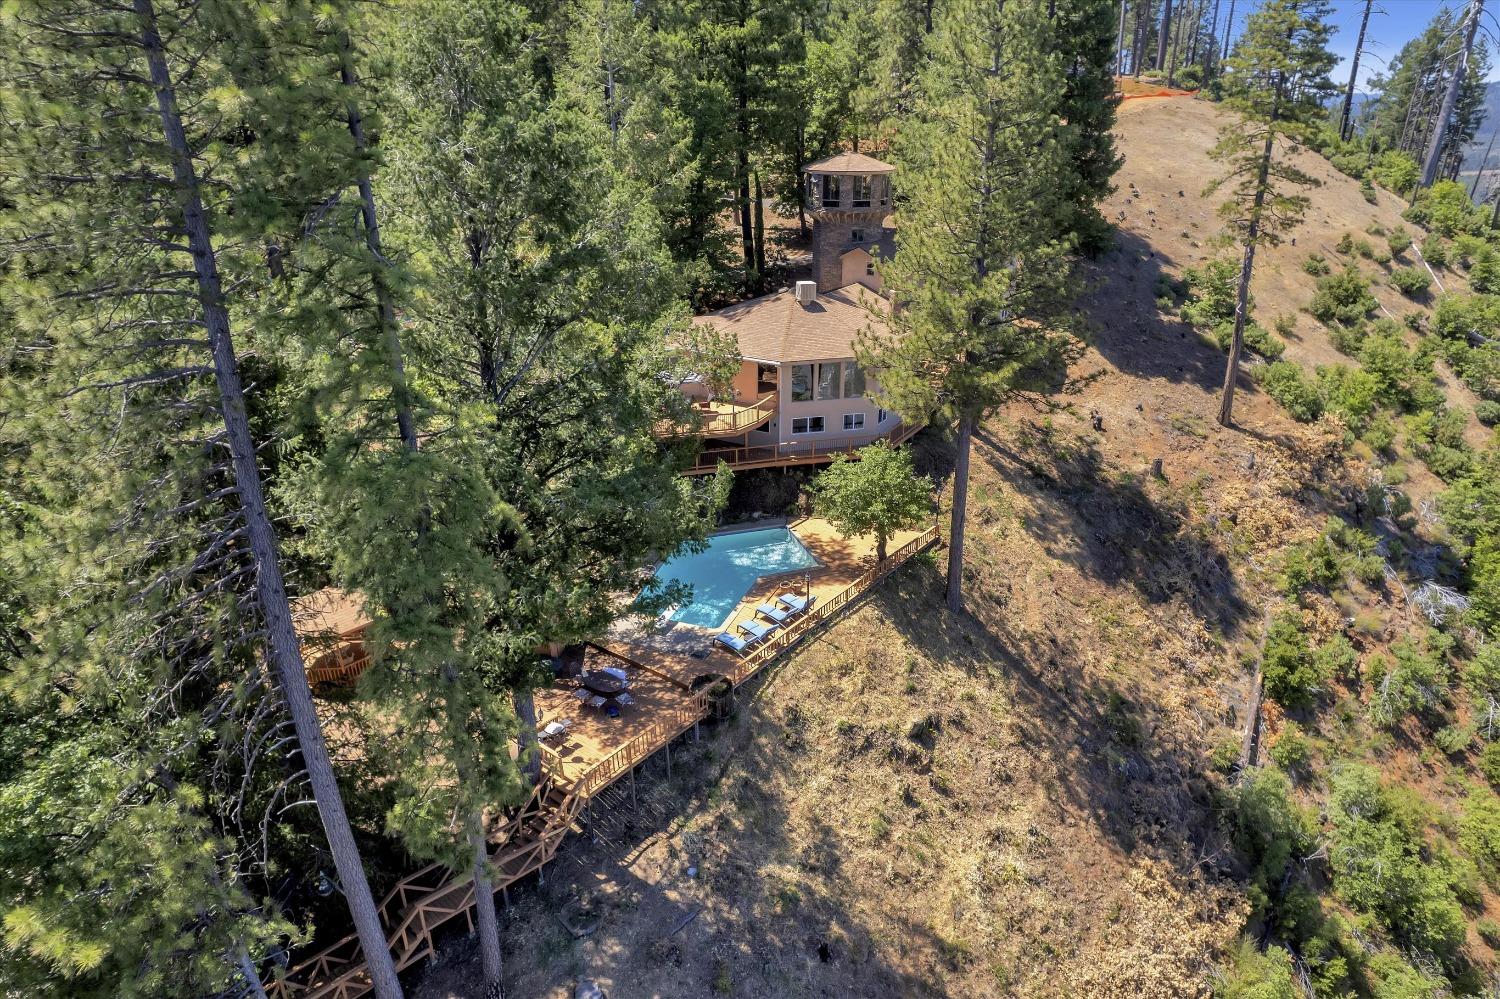 Photo of 2110 King Of The Mountain Rd in Pollock Pines, CA